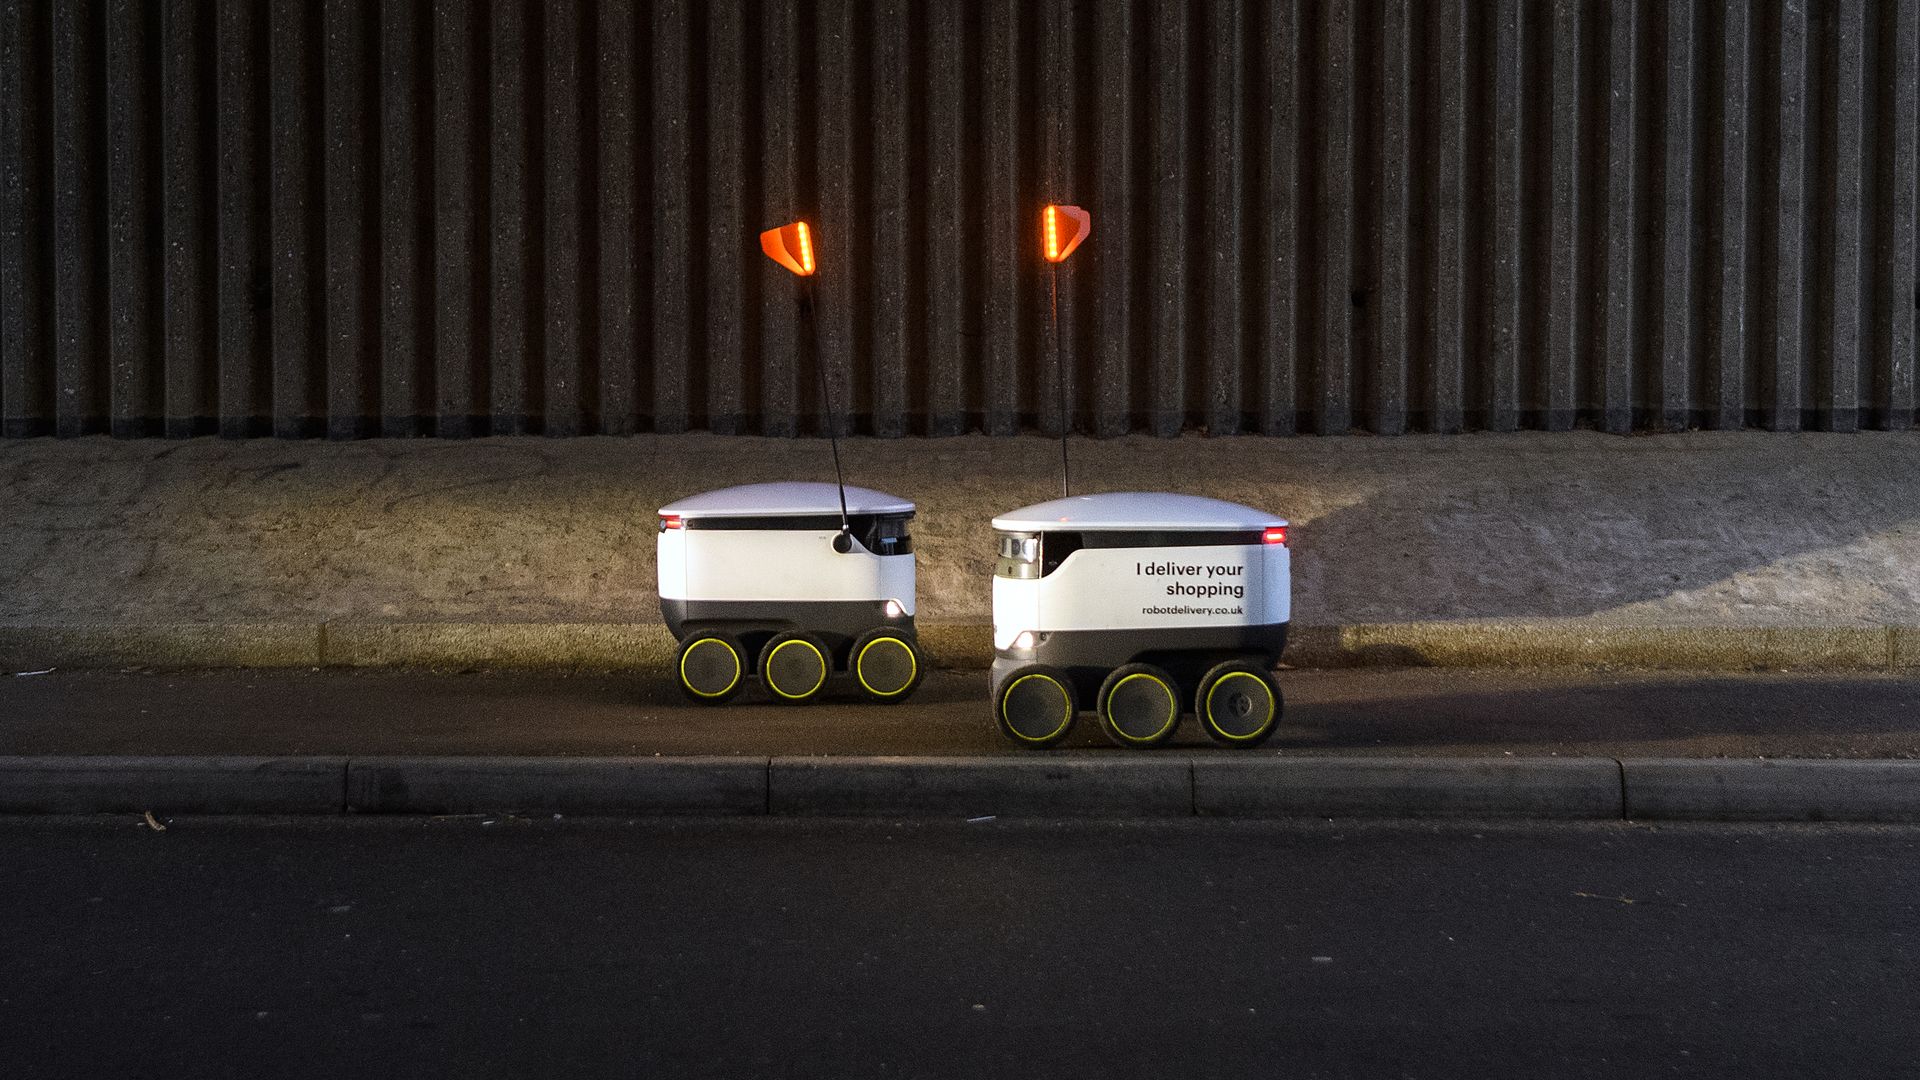 Two delivery robots pass each other